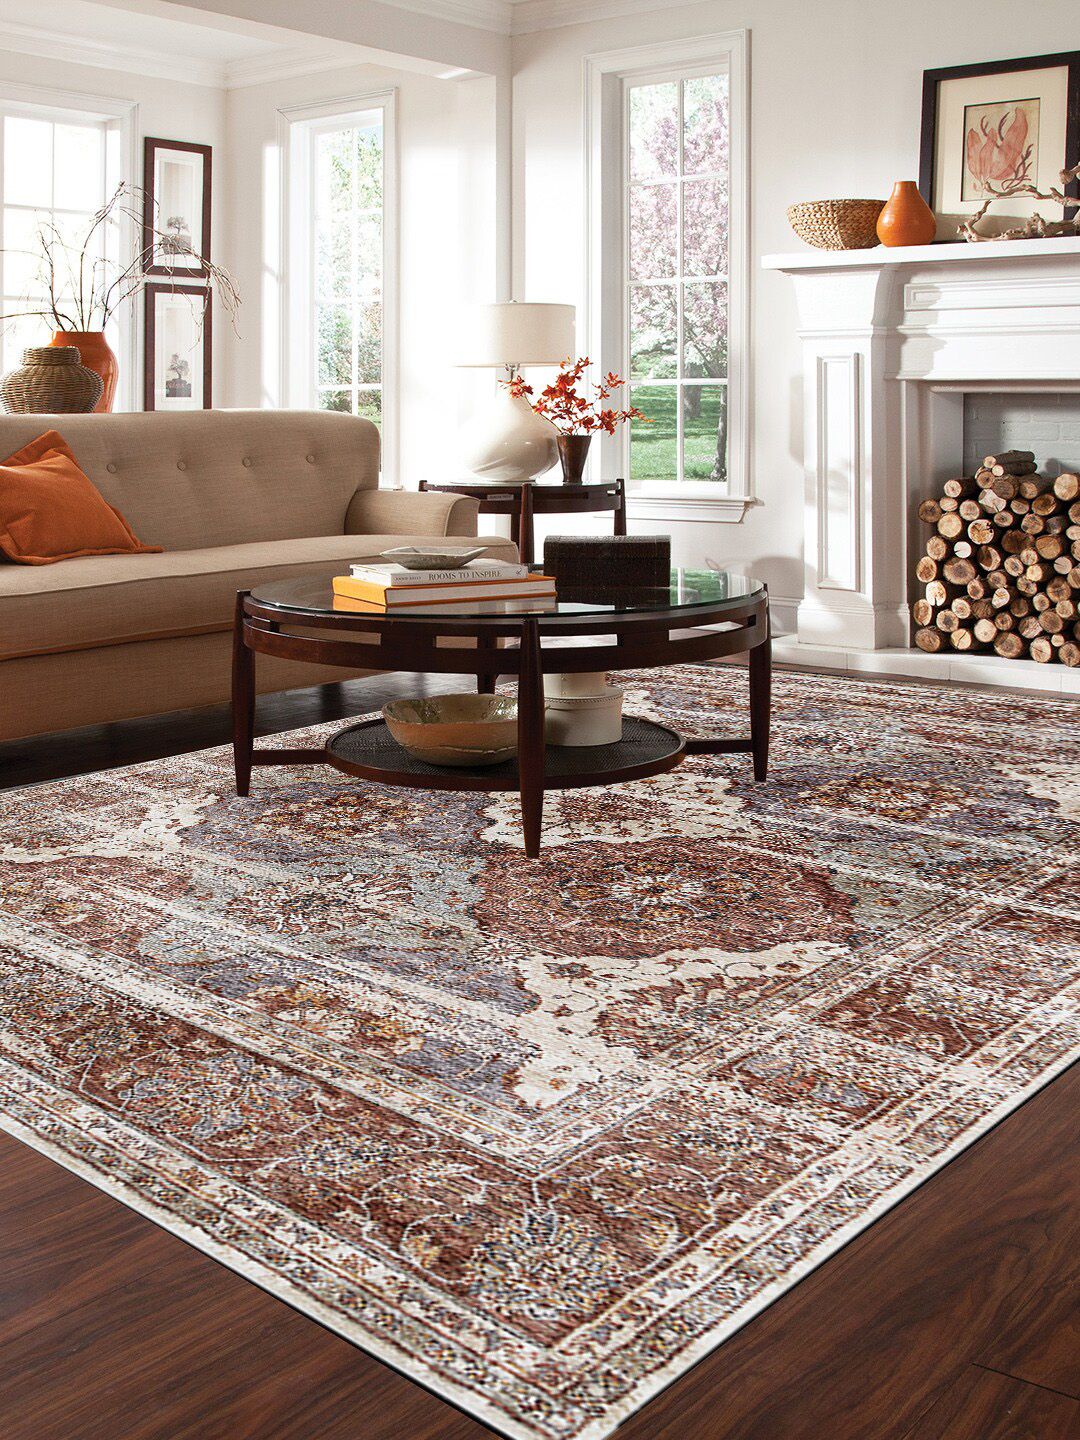 DDecor Brown Ethnic Motifs Printed Carpets Price in India